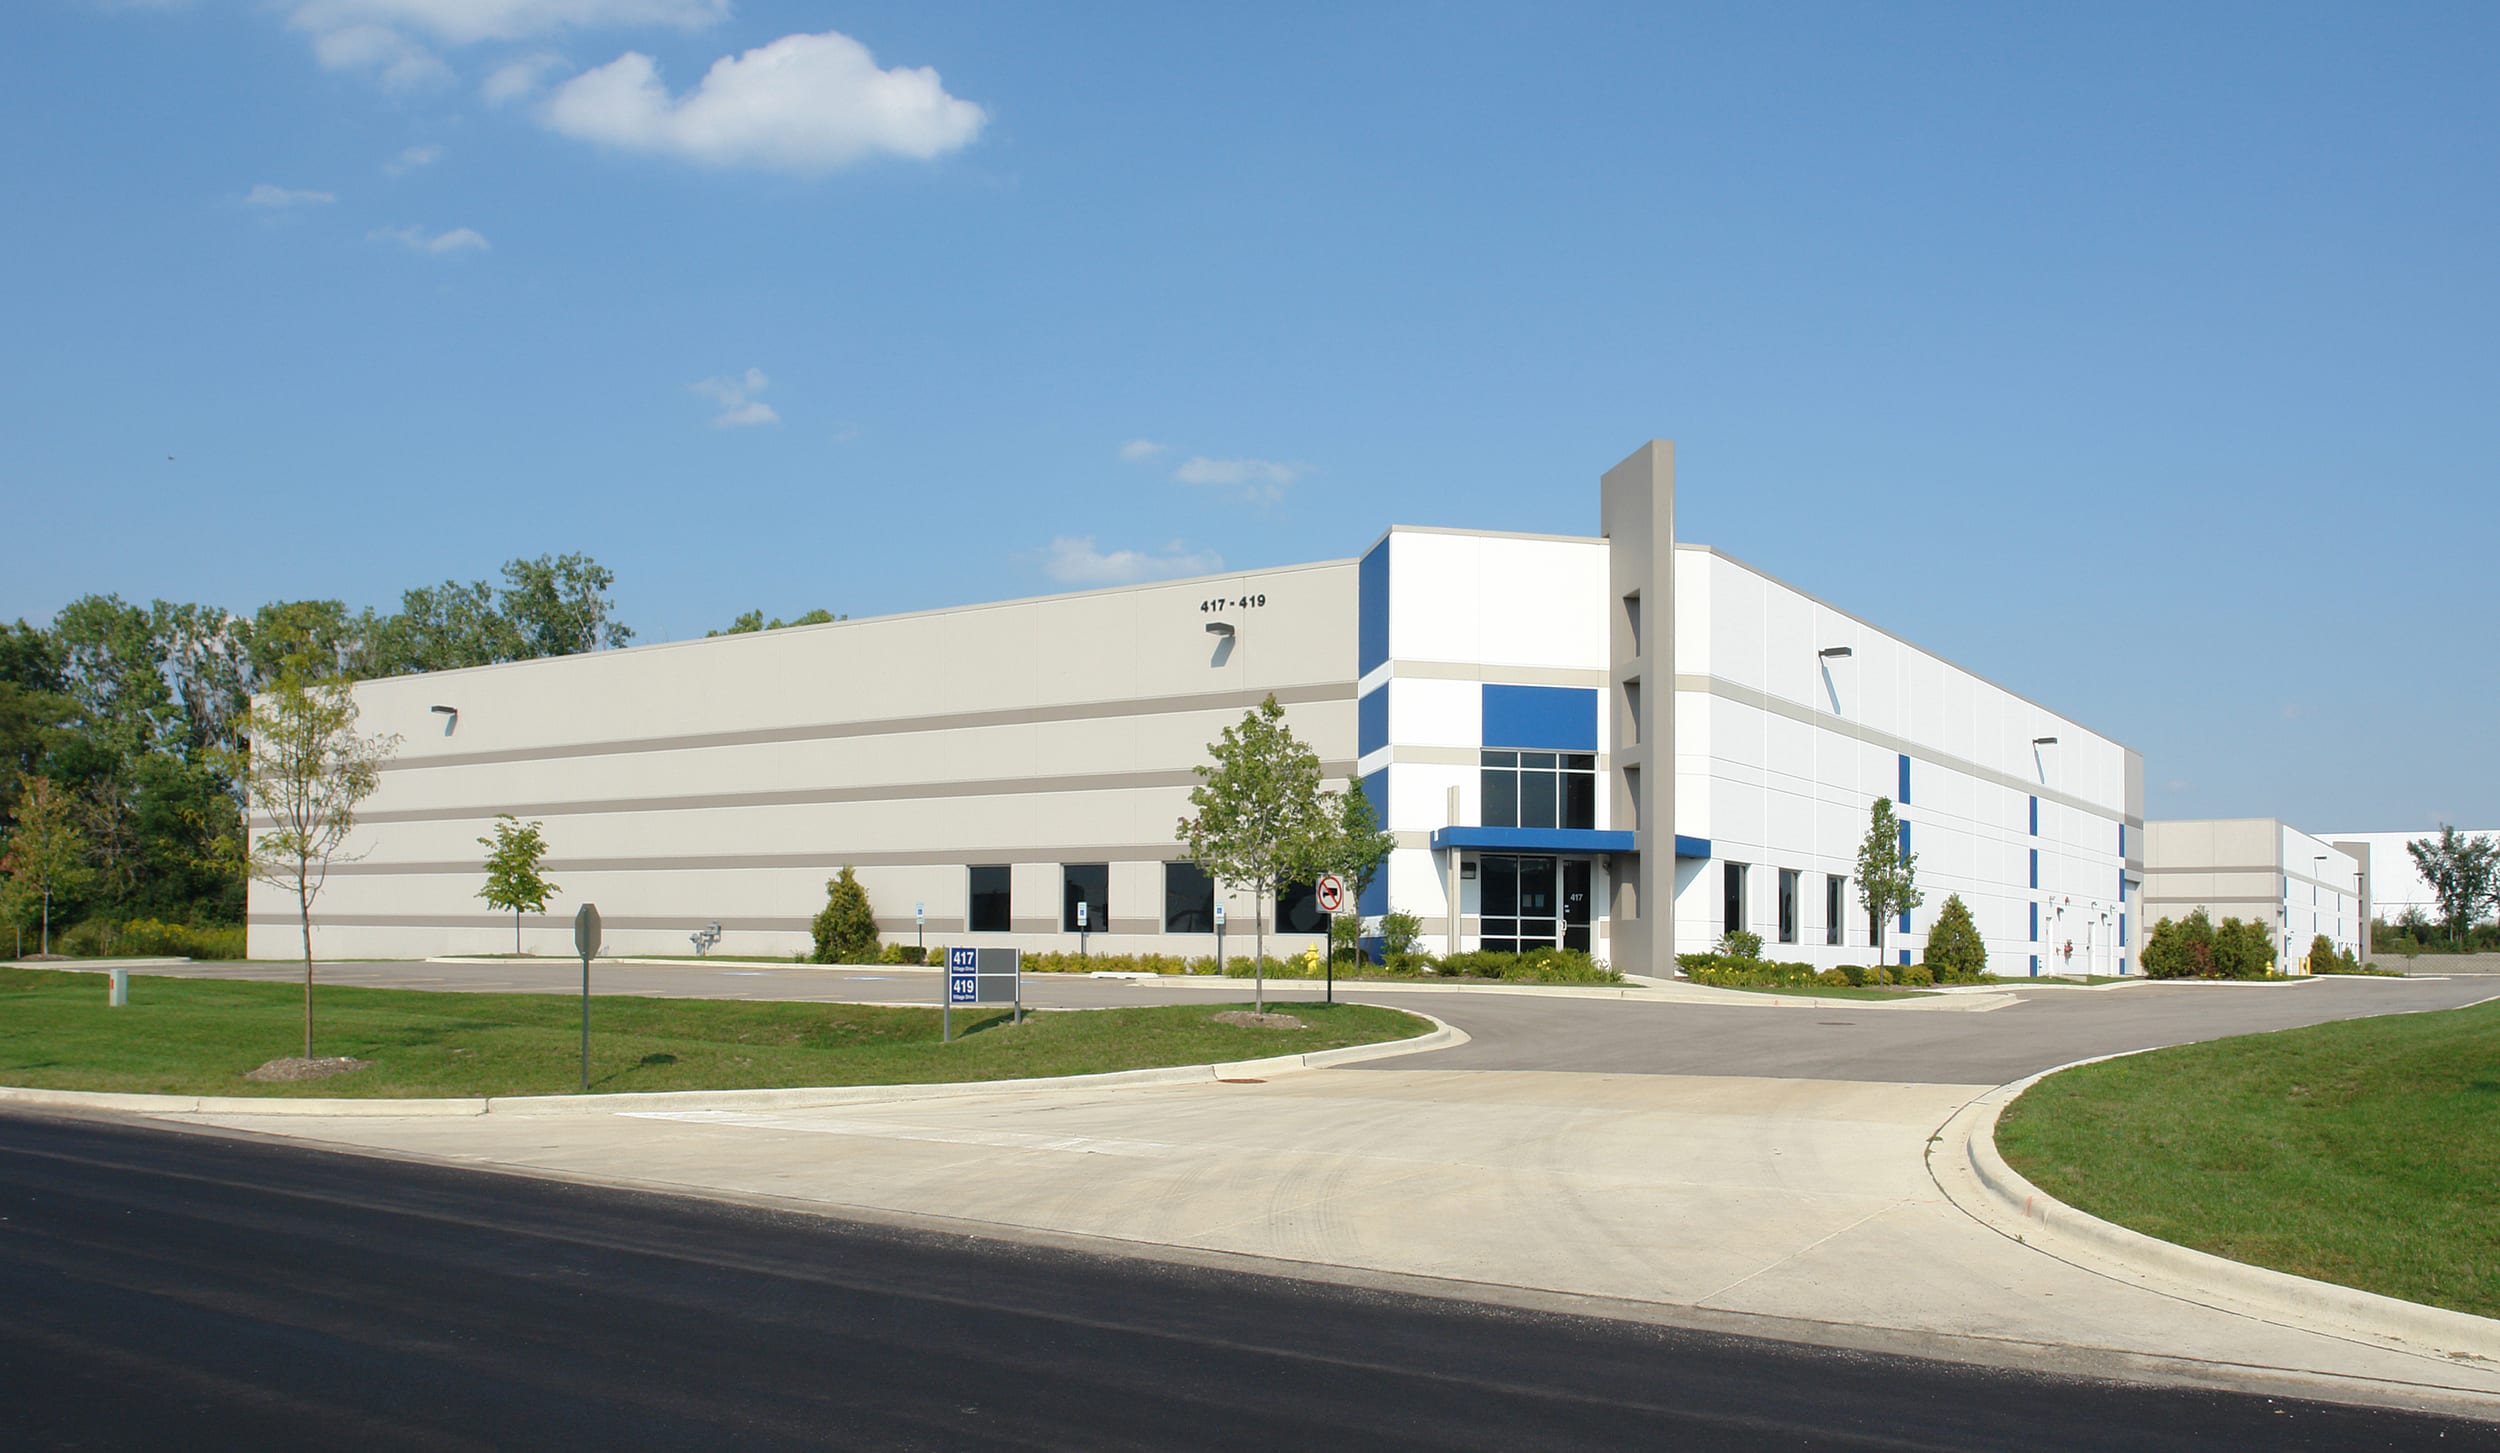 NAI Hiffman represents High Street Realty Company in 4 transactions totaling over 280,000 SF